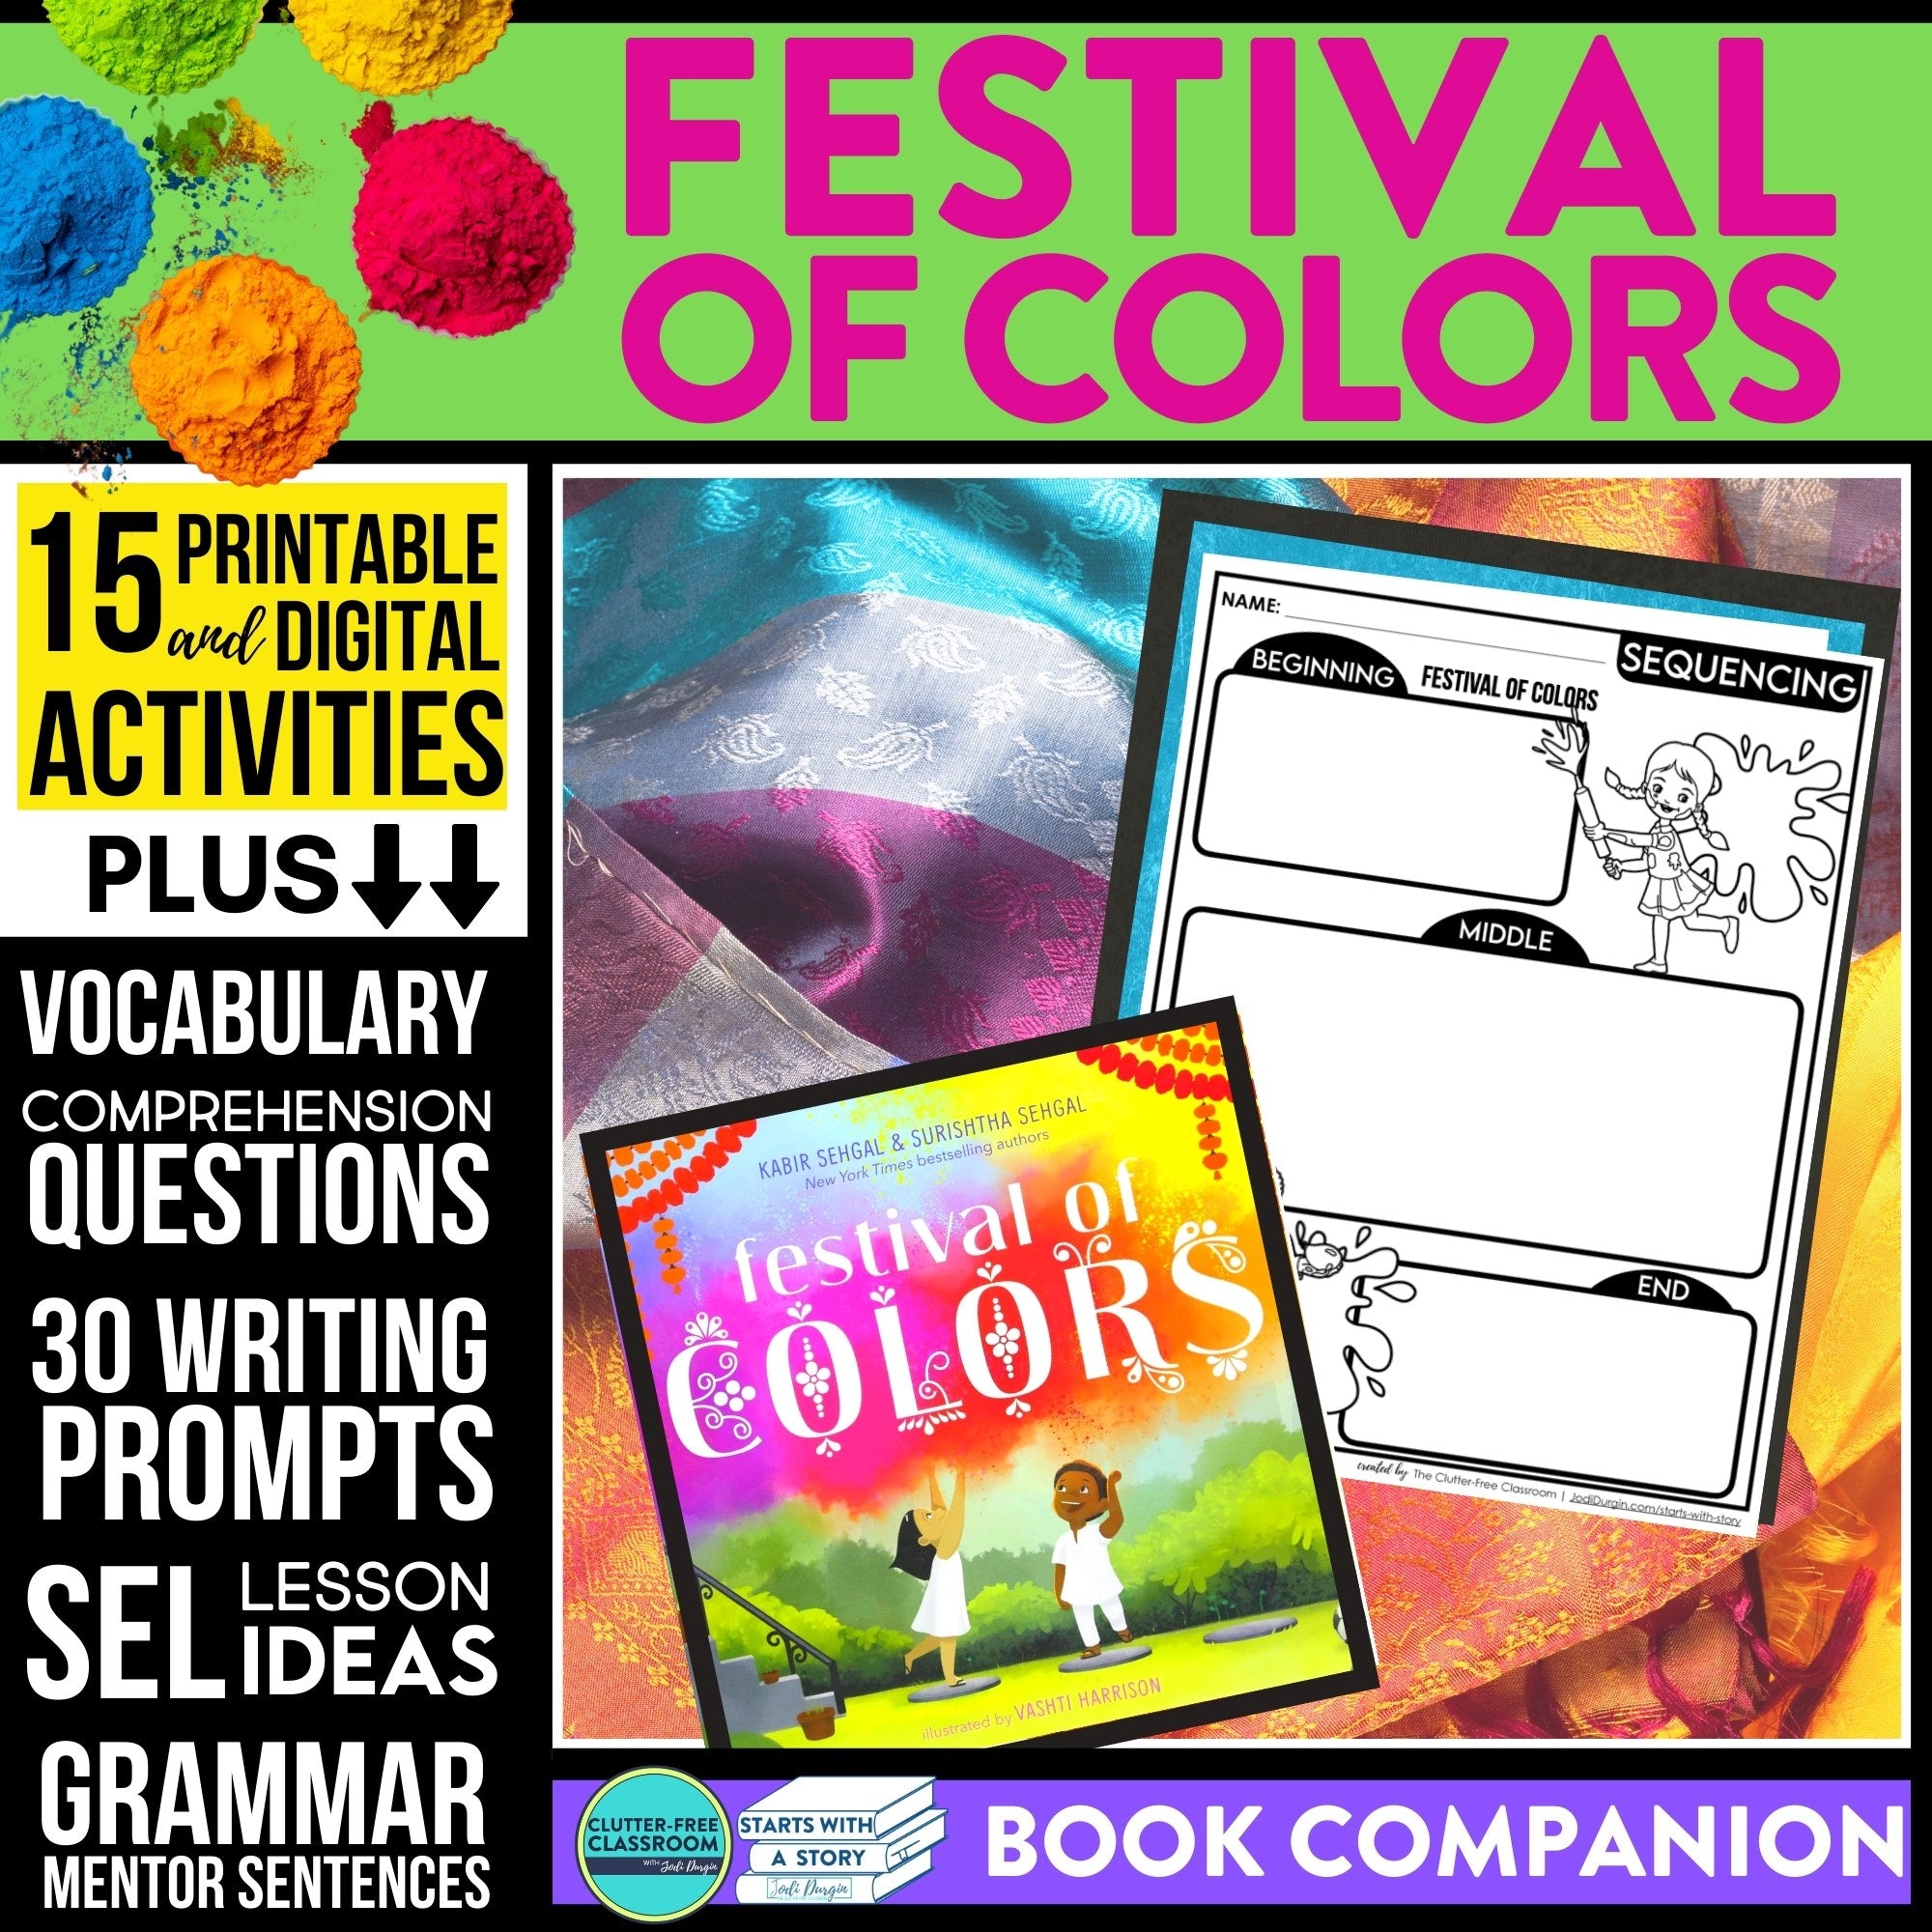 FESTIVAL OF COLORS activities and lesson plan ideas